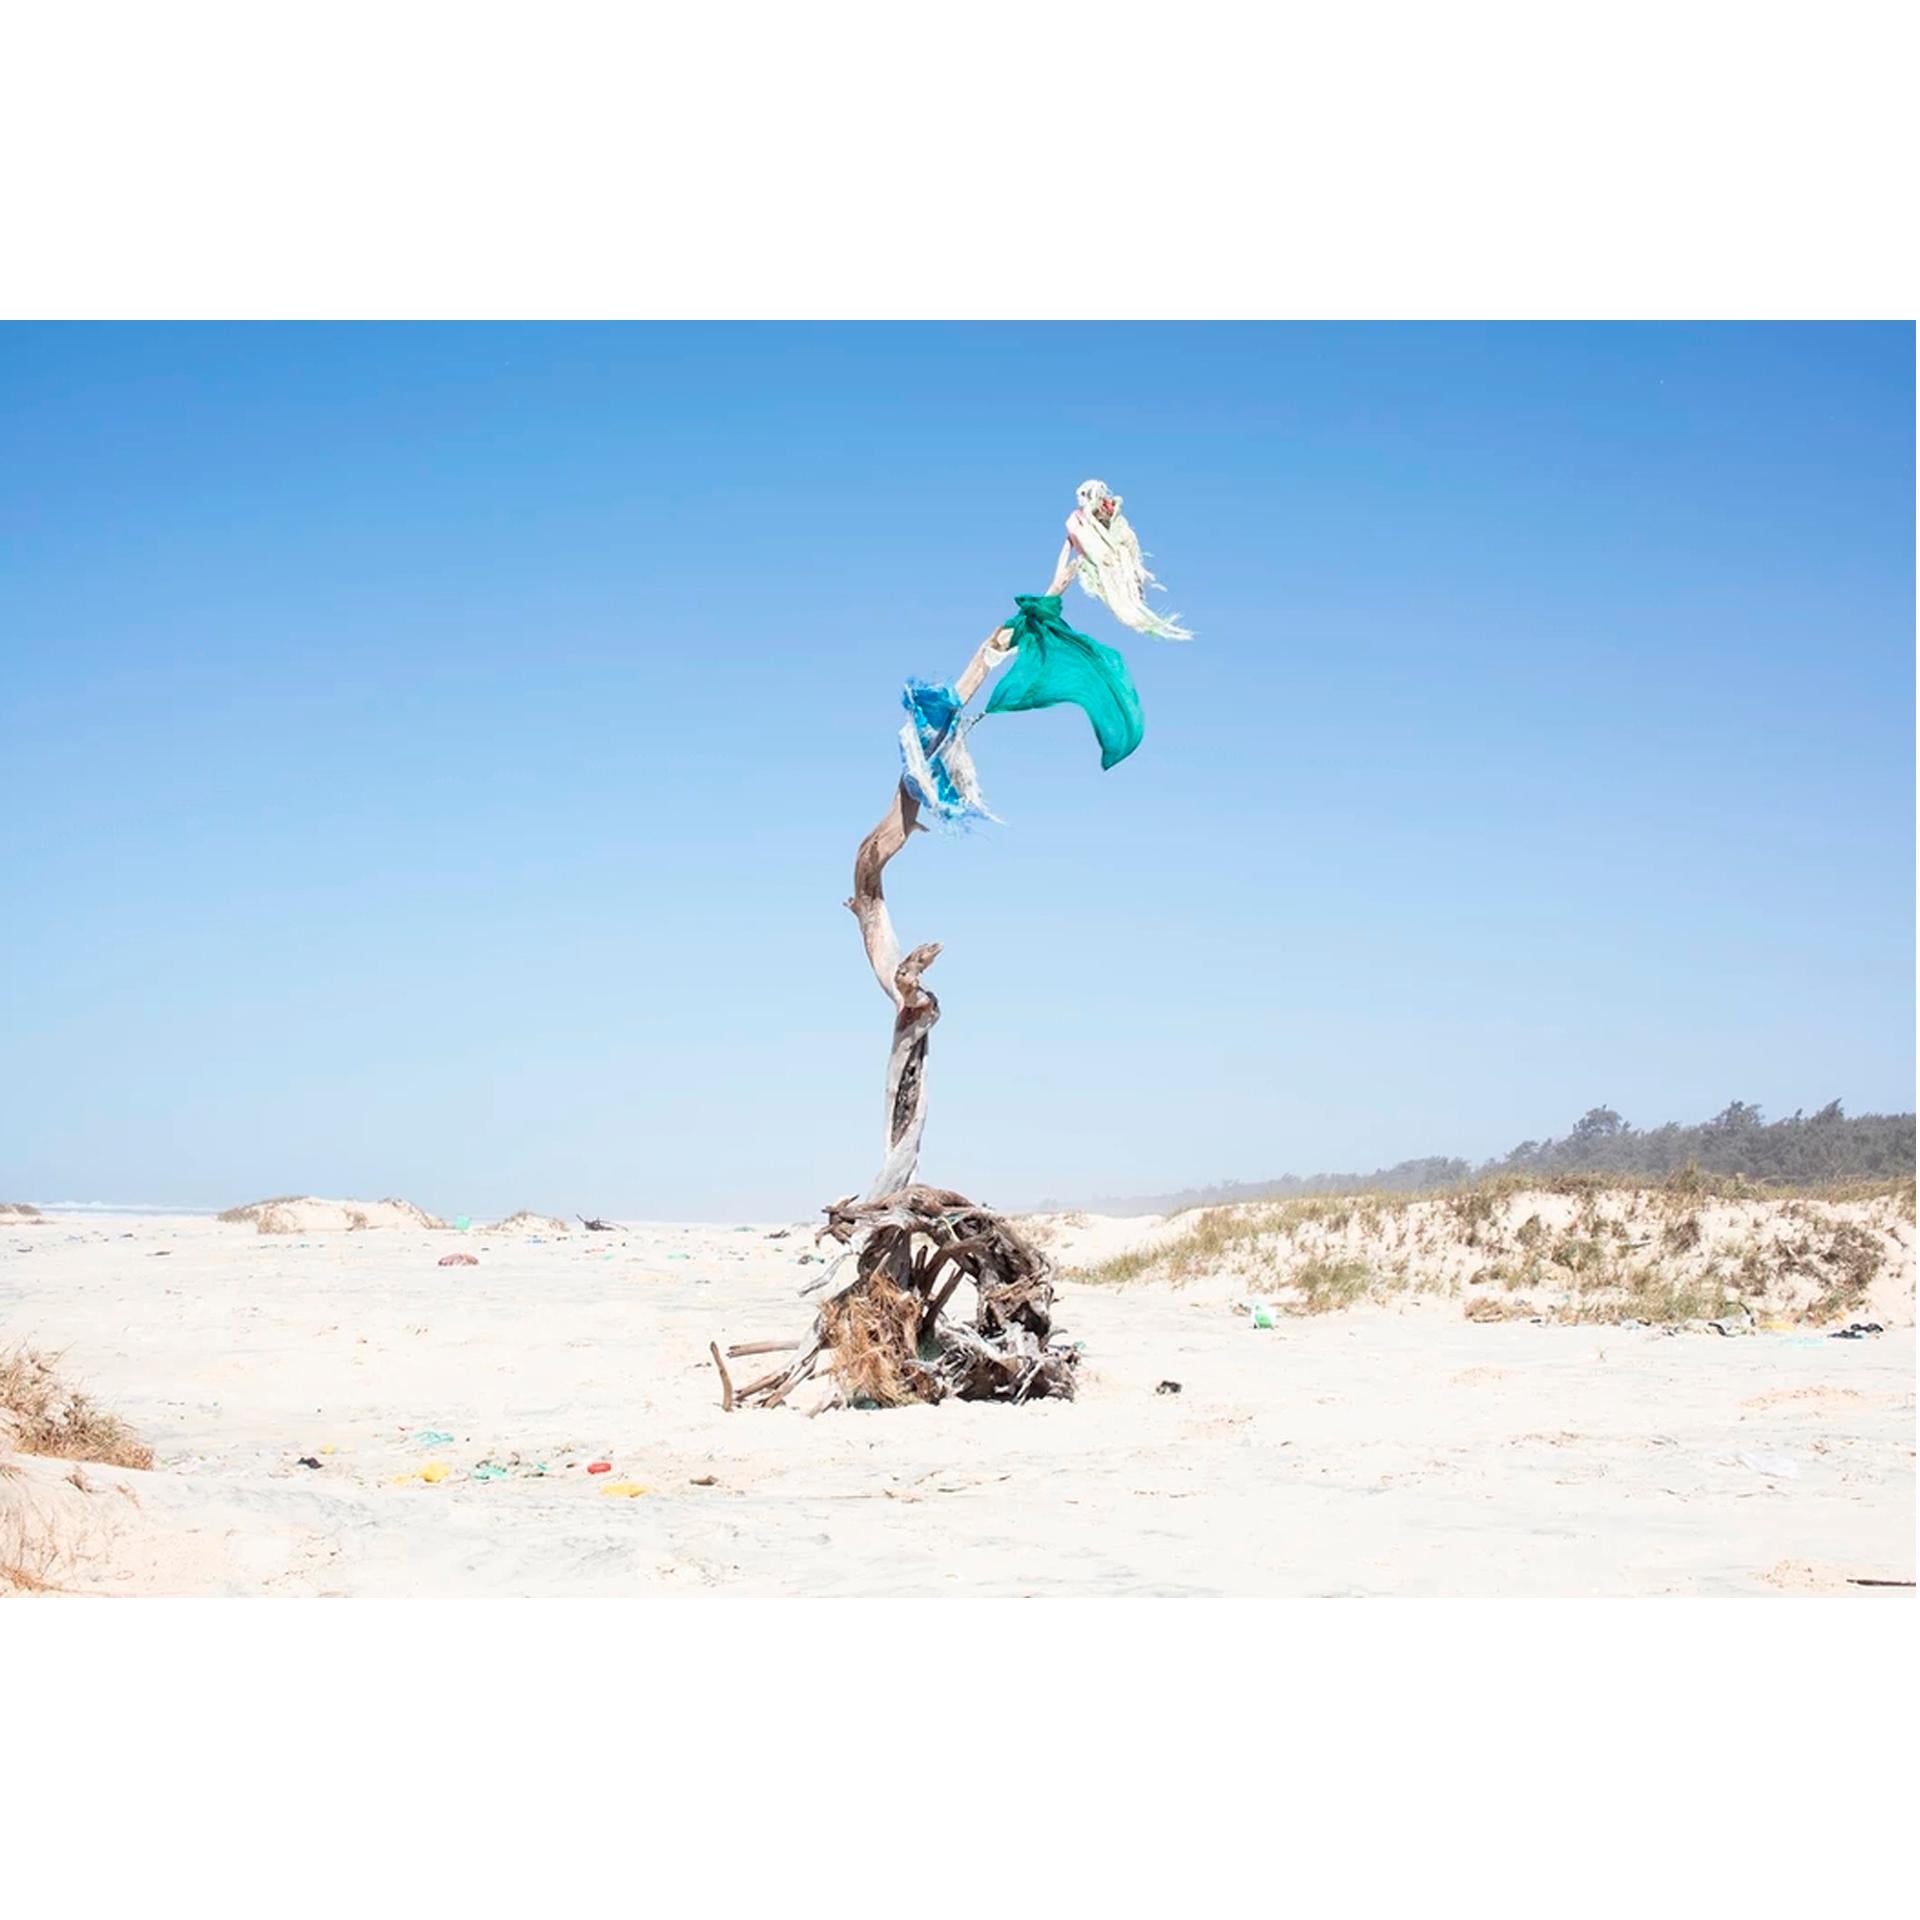 The Khamekaye series was executed in the Grande-Côte, a 150 km-long stretch of Senegal’s coastline between the northern outskirts of Dakar and the River Senegal estuary. Every now and then on this big expanse of beaches and sand dunes, one can make